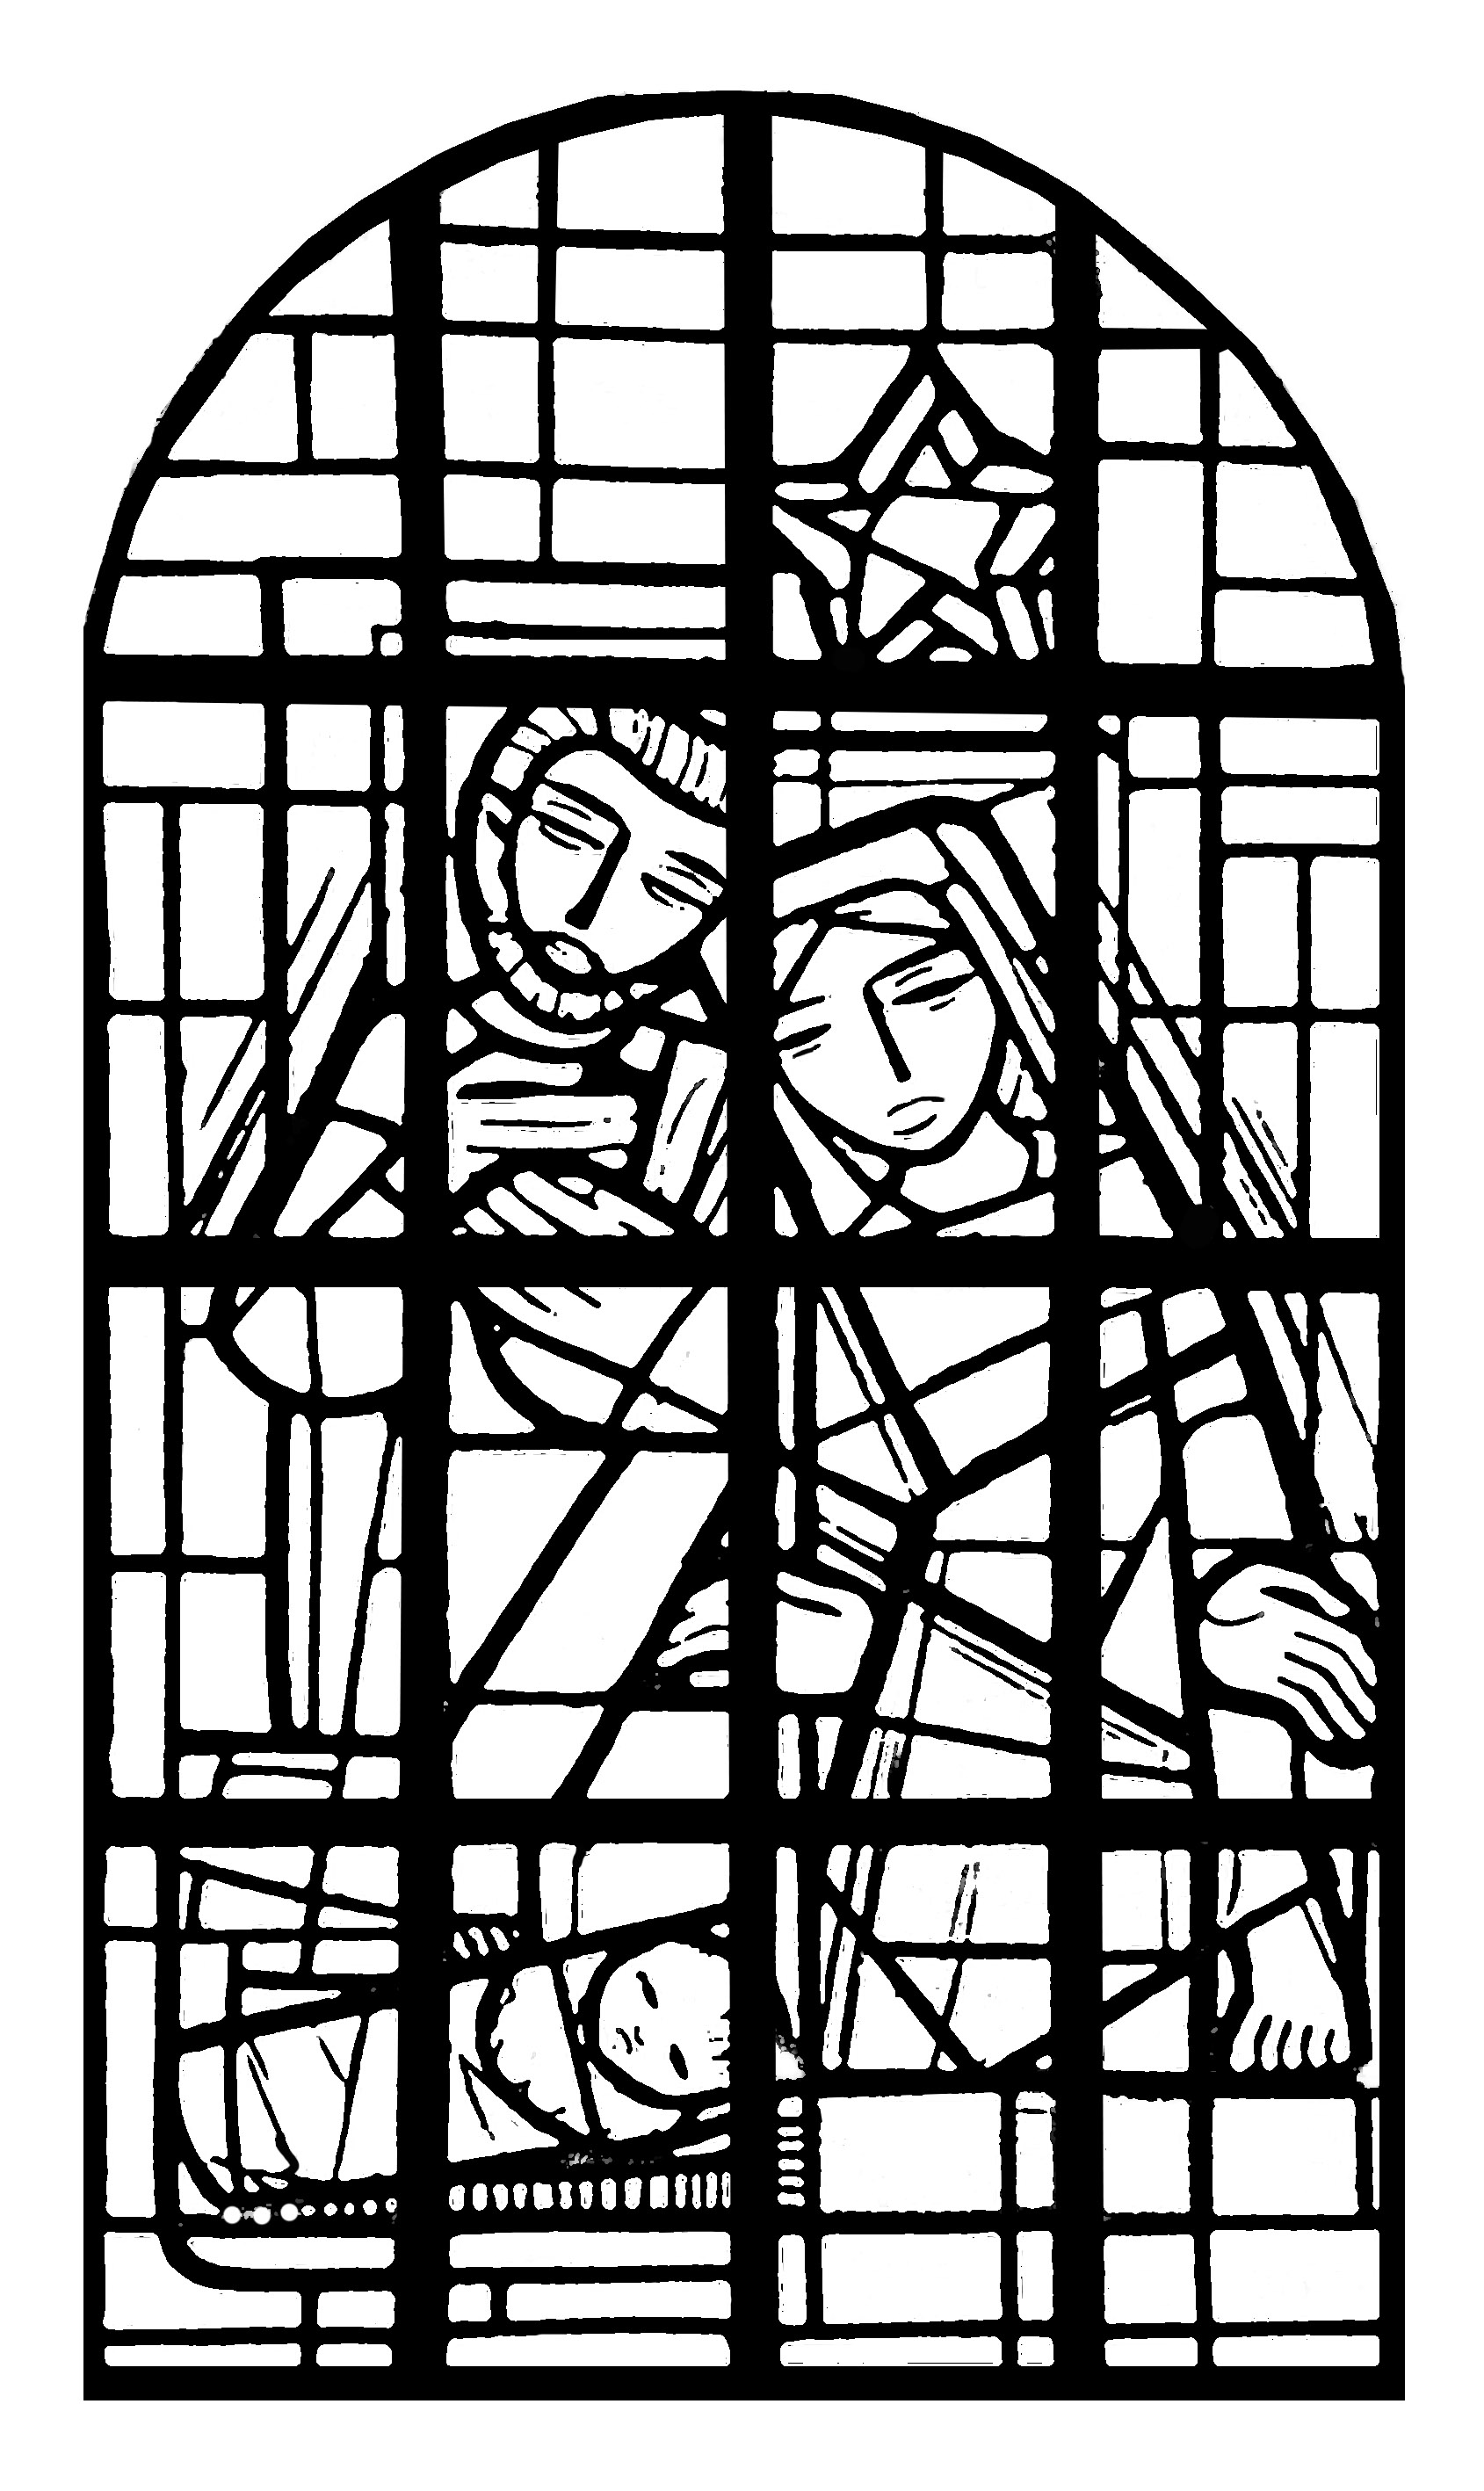 Coloring page for adult : Stained glass of the nave of a church in France : 'Immaculée conception, at Mangombroux (Verviers)'